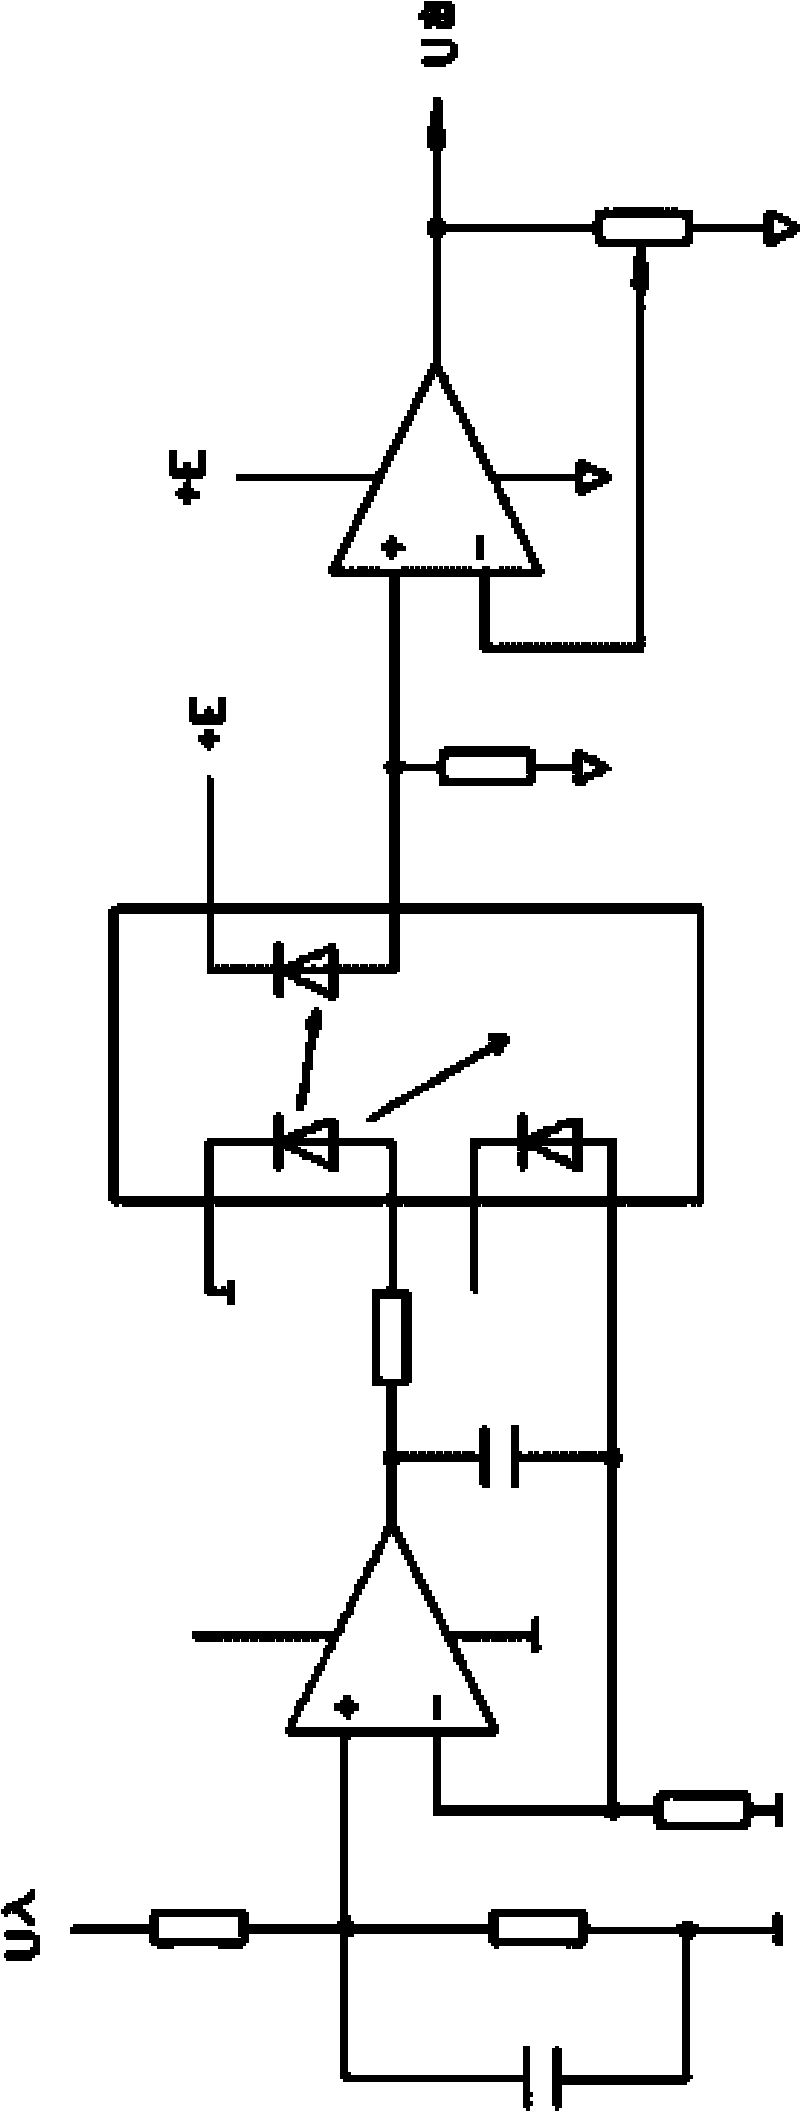 Isolation detection circuit of DC bus voltage